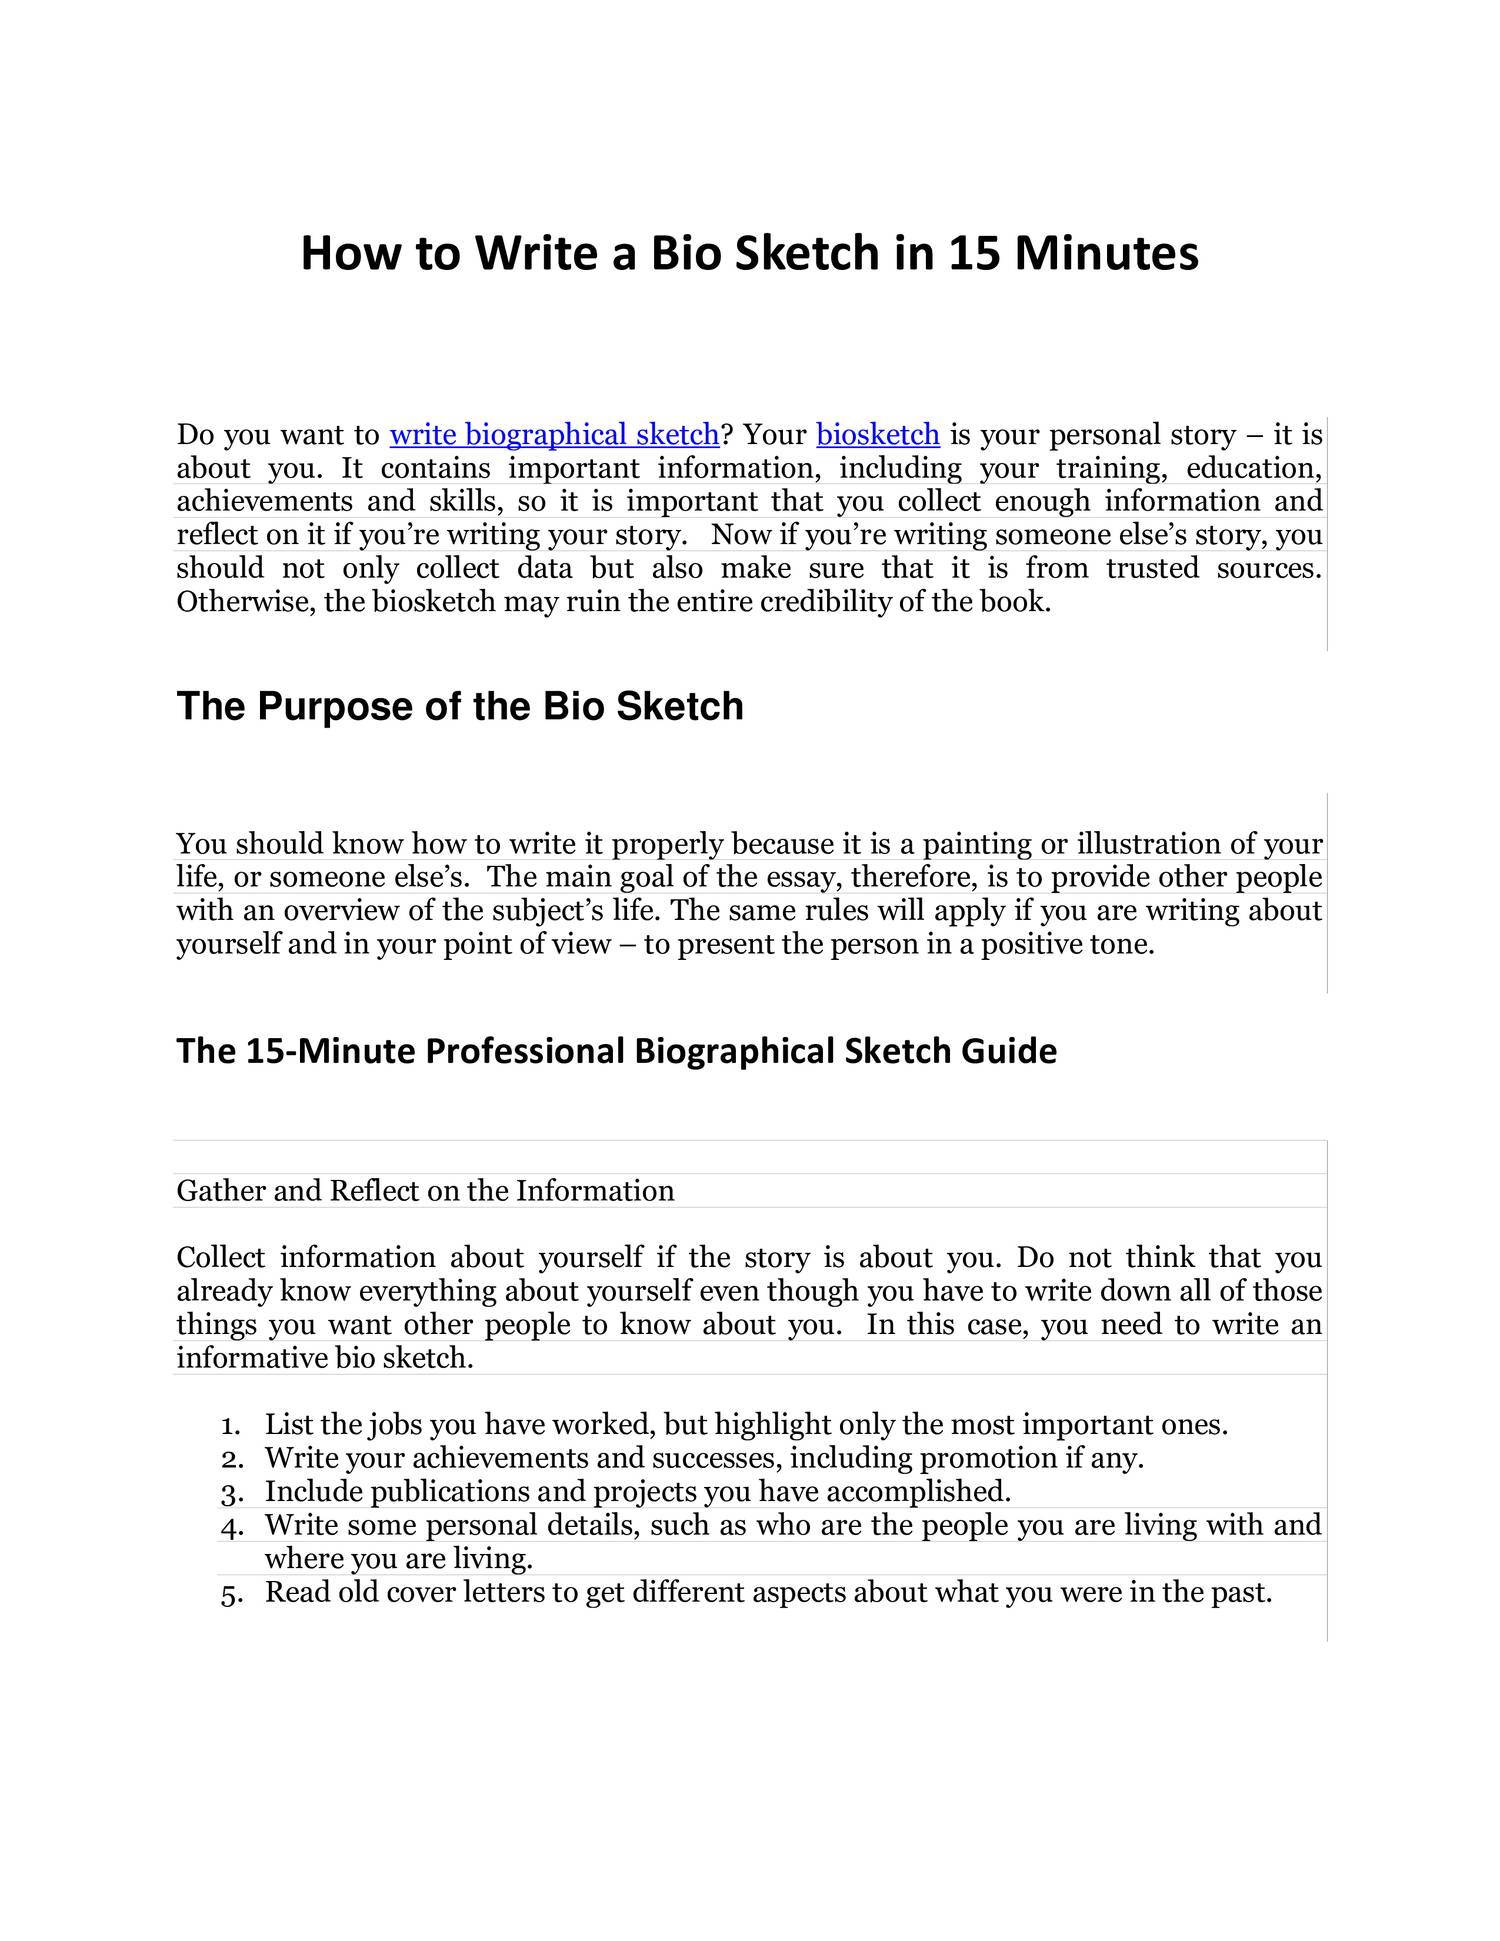 Biographical sketch lesson plan